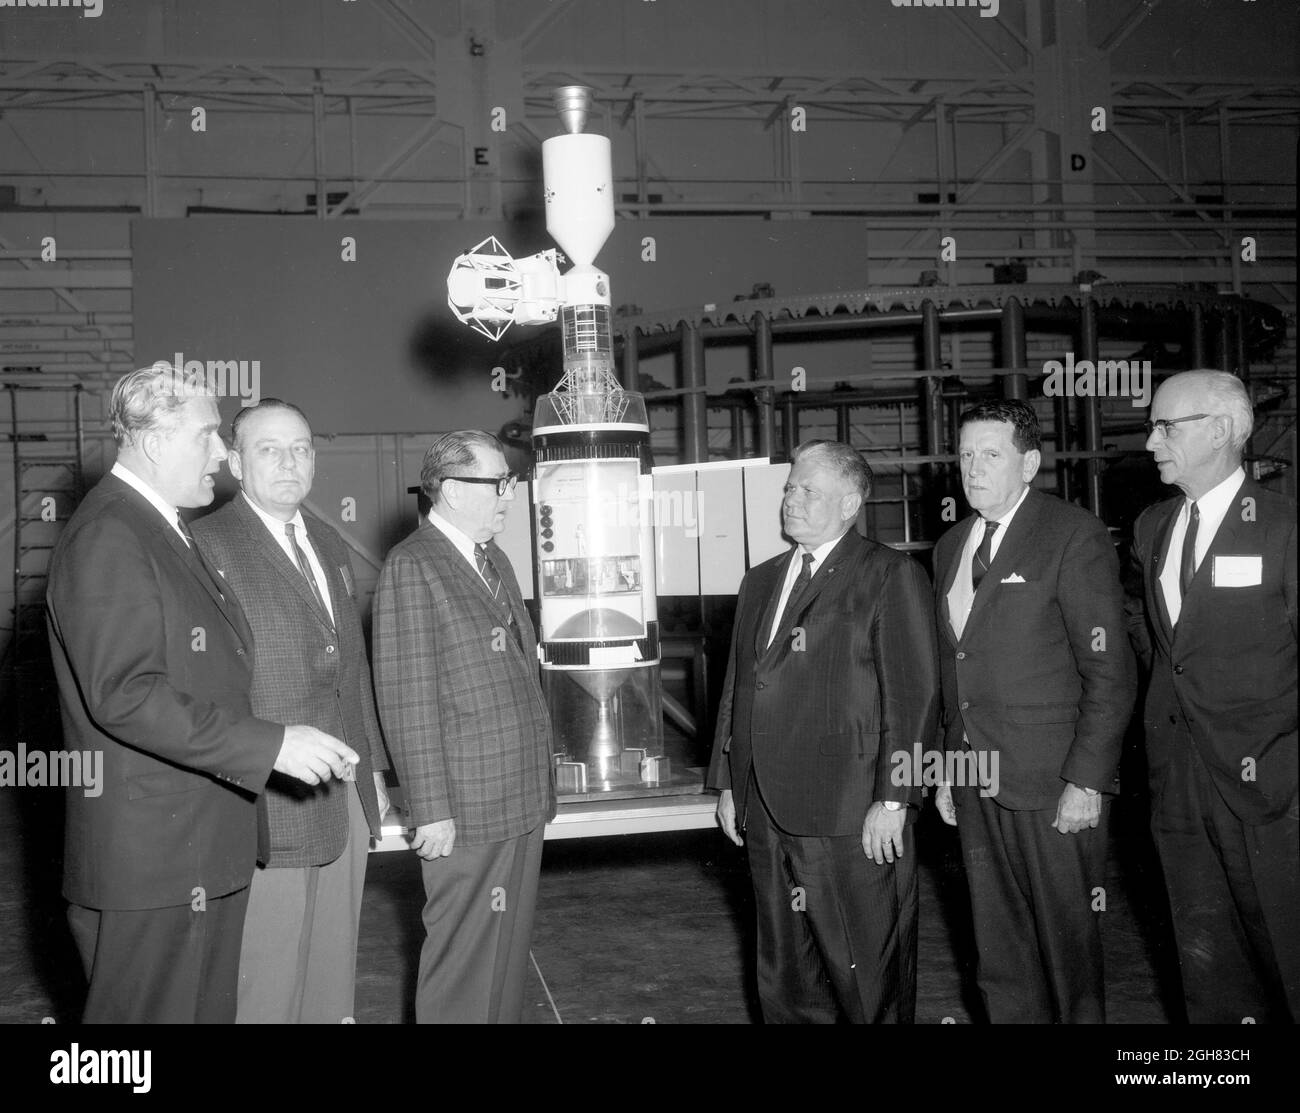 THE MEMBERS OF THE HOUSE COMMITTEE ON SCIENCE AND ASTRONAUTICS VISITED THE MARSHALL SPACE FLIGHT CENTER (MSFC) ON MARCH 9, 1962 TO GATHER FIRSTHAND INFORMATION OF THE NATION'S SPACE EXPLORATION PROGRAM.  THE CONGRESSIONAL GROUP WAS COMPOSED OF MEMBERS OF THE SUBCOMMITTEE ON MANNED SPACE FLIGHT.  STANDING AT THE APOLLO APPLICATIONS PROGRAM CLUSTER MODEL IN BUILDING 4745 ARE (LEFT TO RIGHT): DR. WERNHER VON BRAUN, MSFC; CONGRESSMAN JOE D. WAGGONNER (D-LOUISIANA); CONGRESSMAN EARLE CABELL, (D-TEXAS); SUBCOMMITTEE CHAIRMAN OLIN E. TEAGUE, (D-TEXAS; CONGRESSMAN JAMES G. FULTON, )R-PENNSYLVANIA; AND Stock Photo